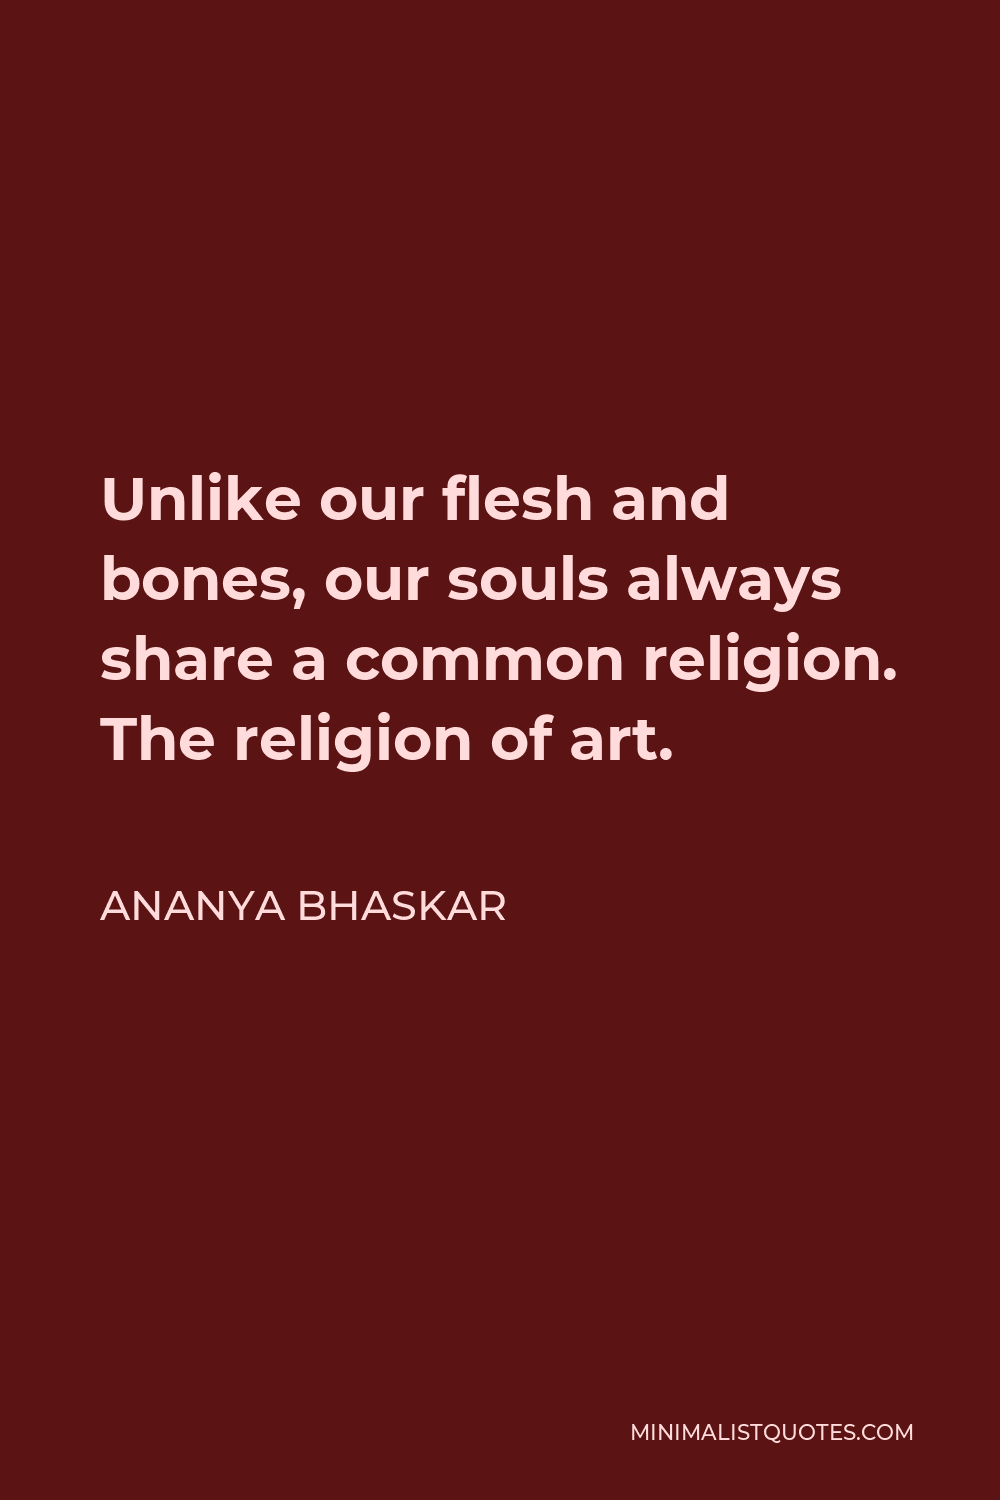 Ananya Bhaskar Quote - Unlike our flesh and bones, our souls always share a common religion. The religion of art.